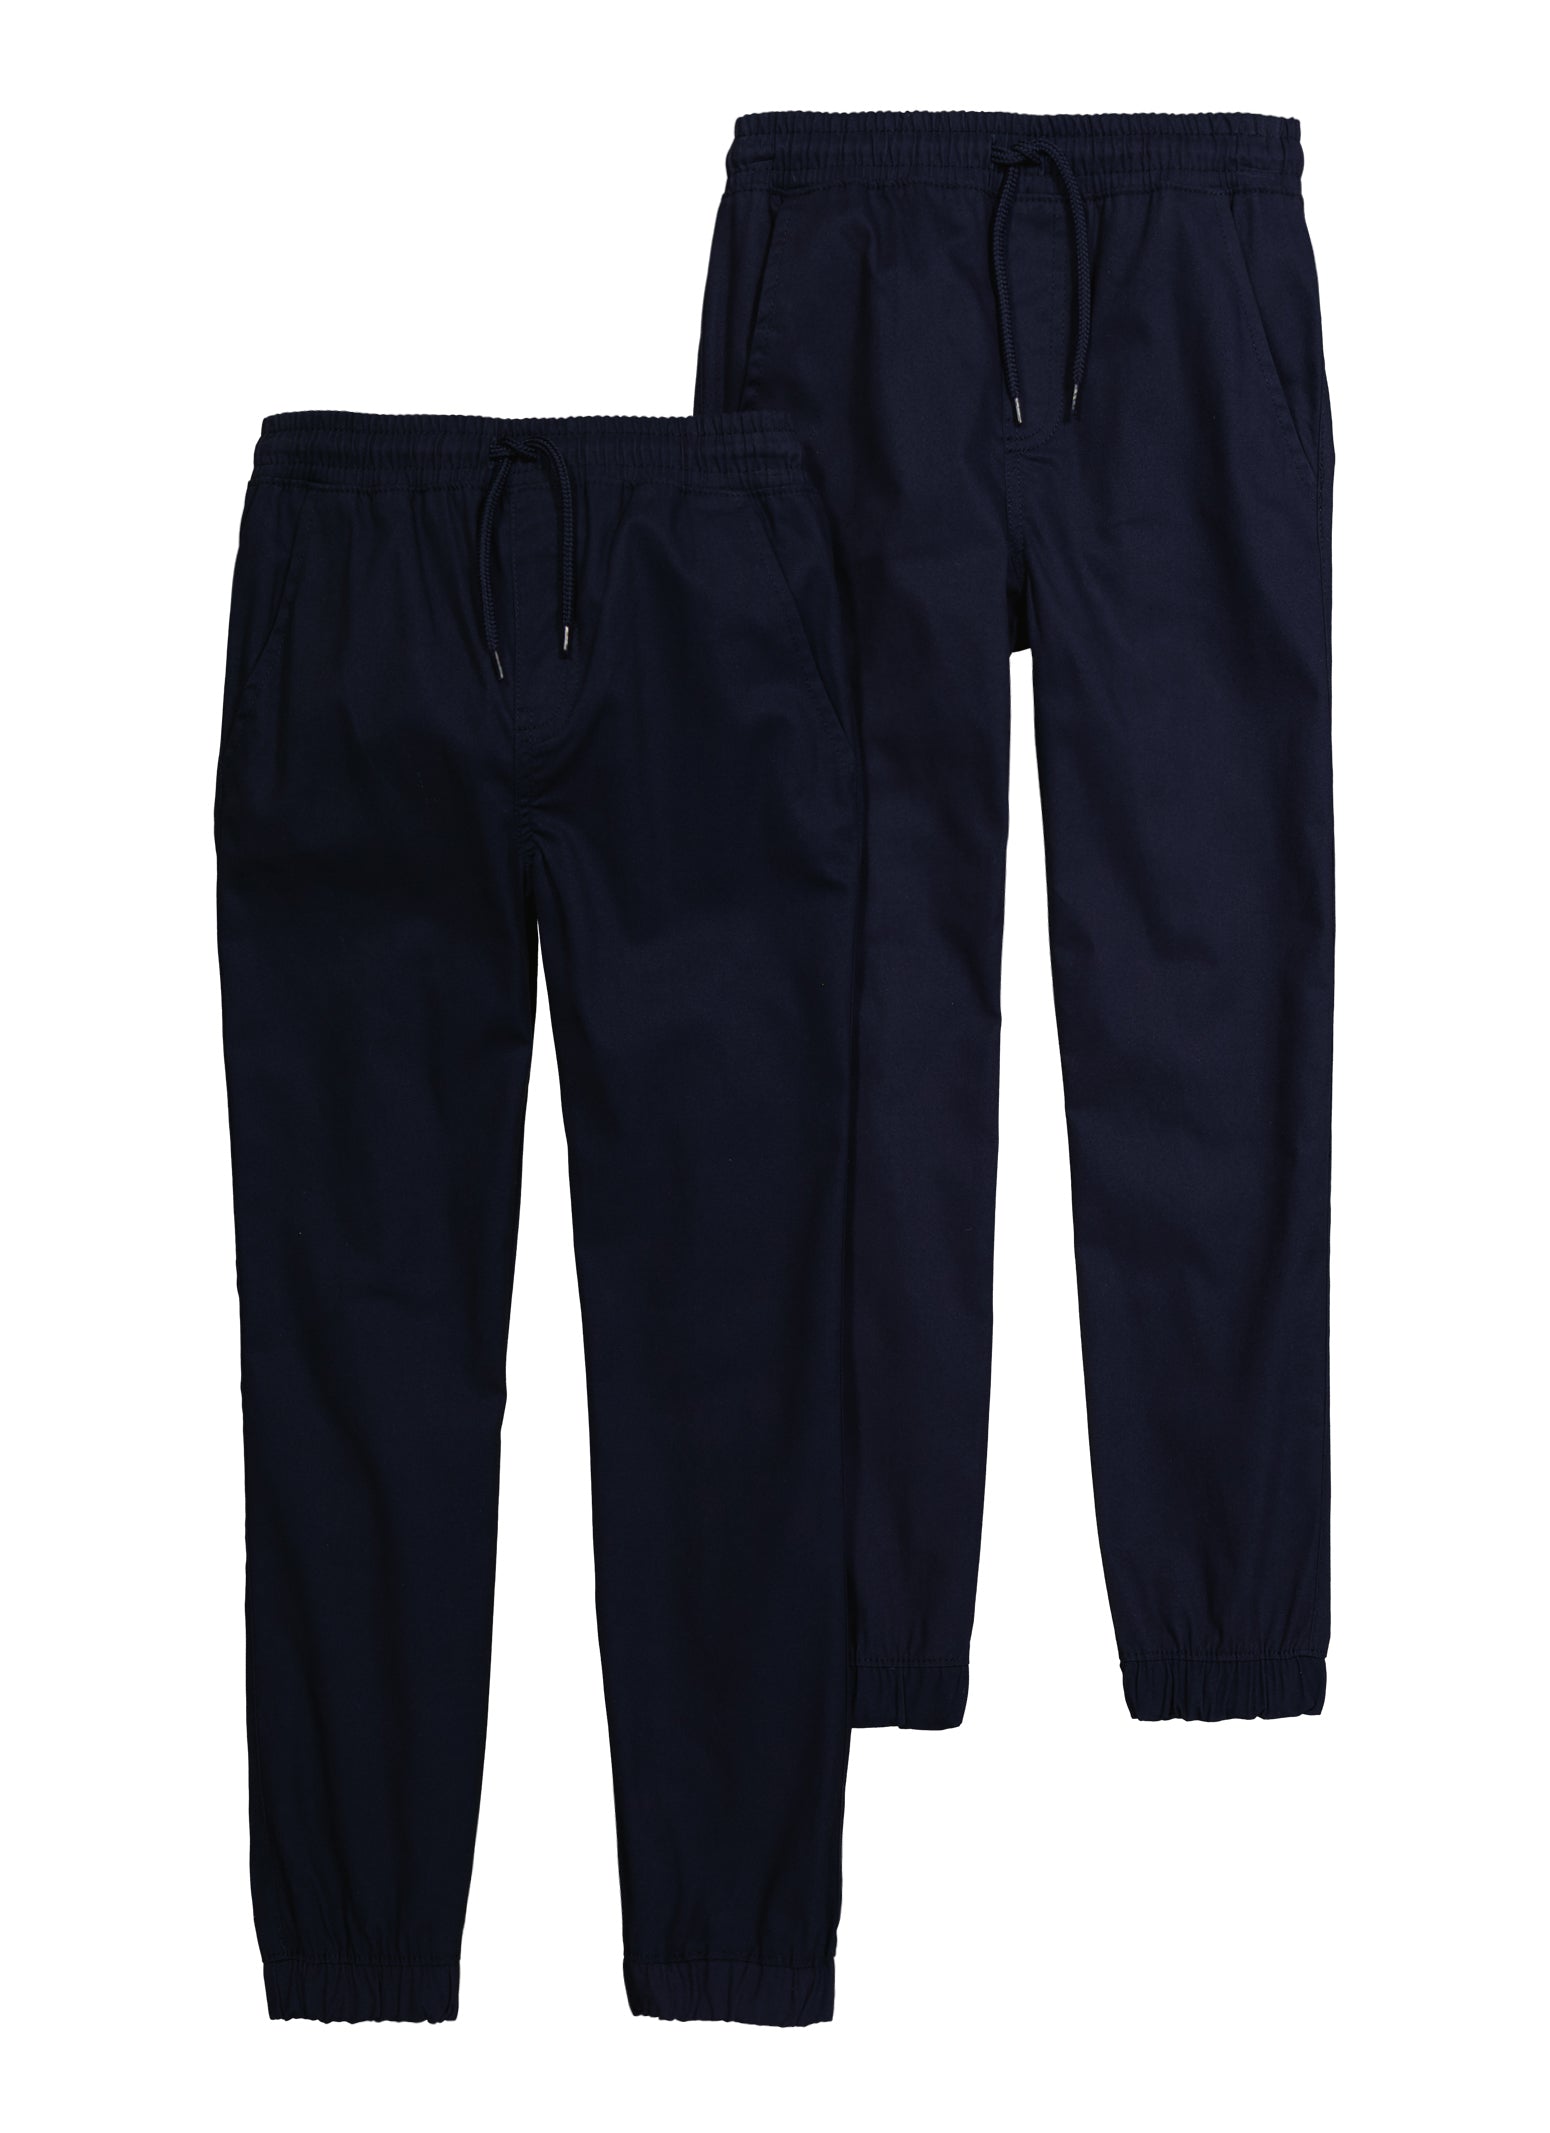 Boys 2 Pack Solid Twill Joggers